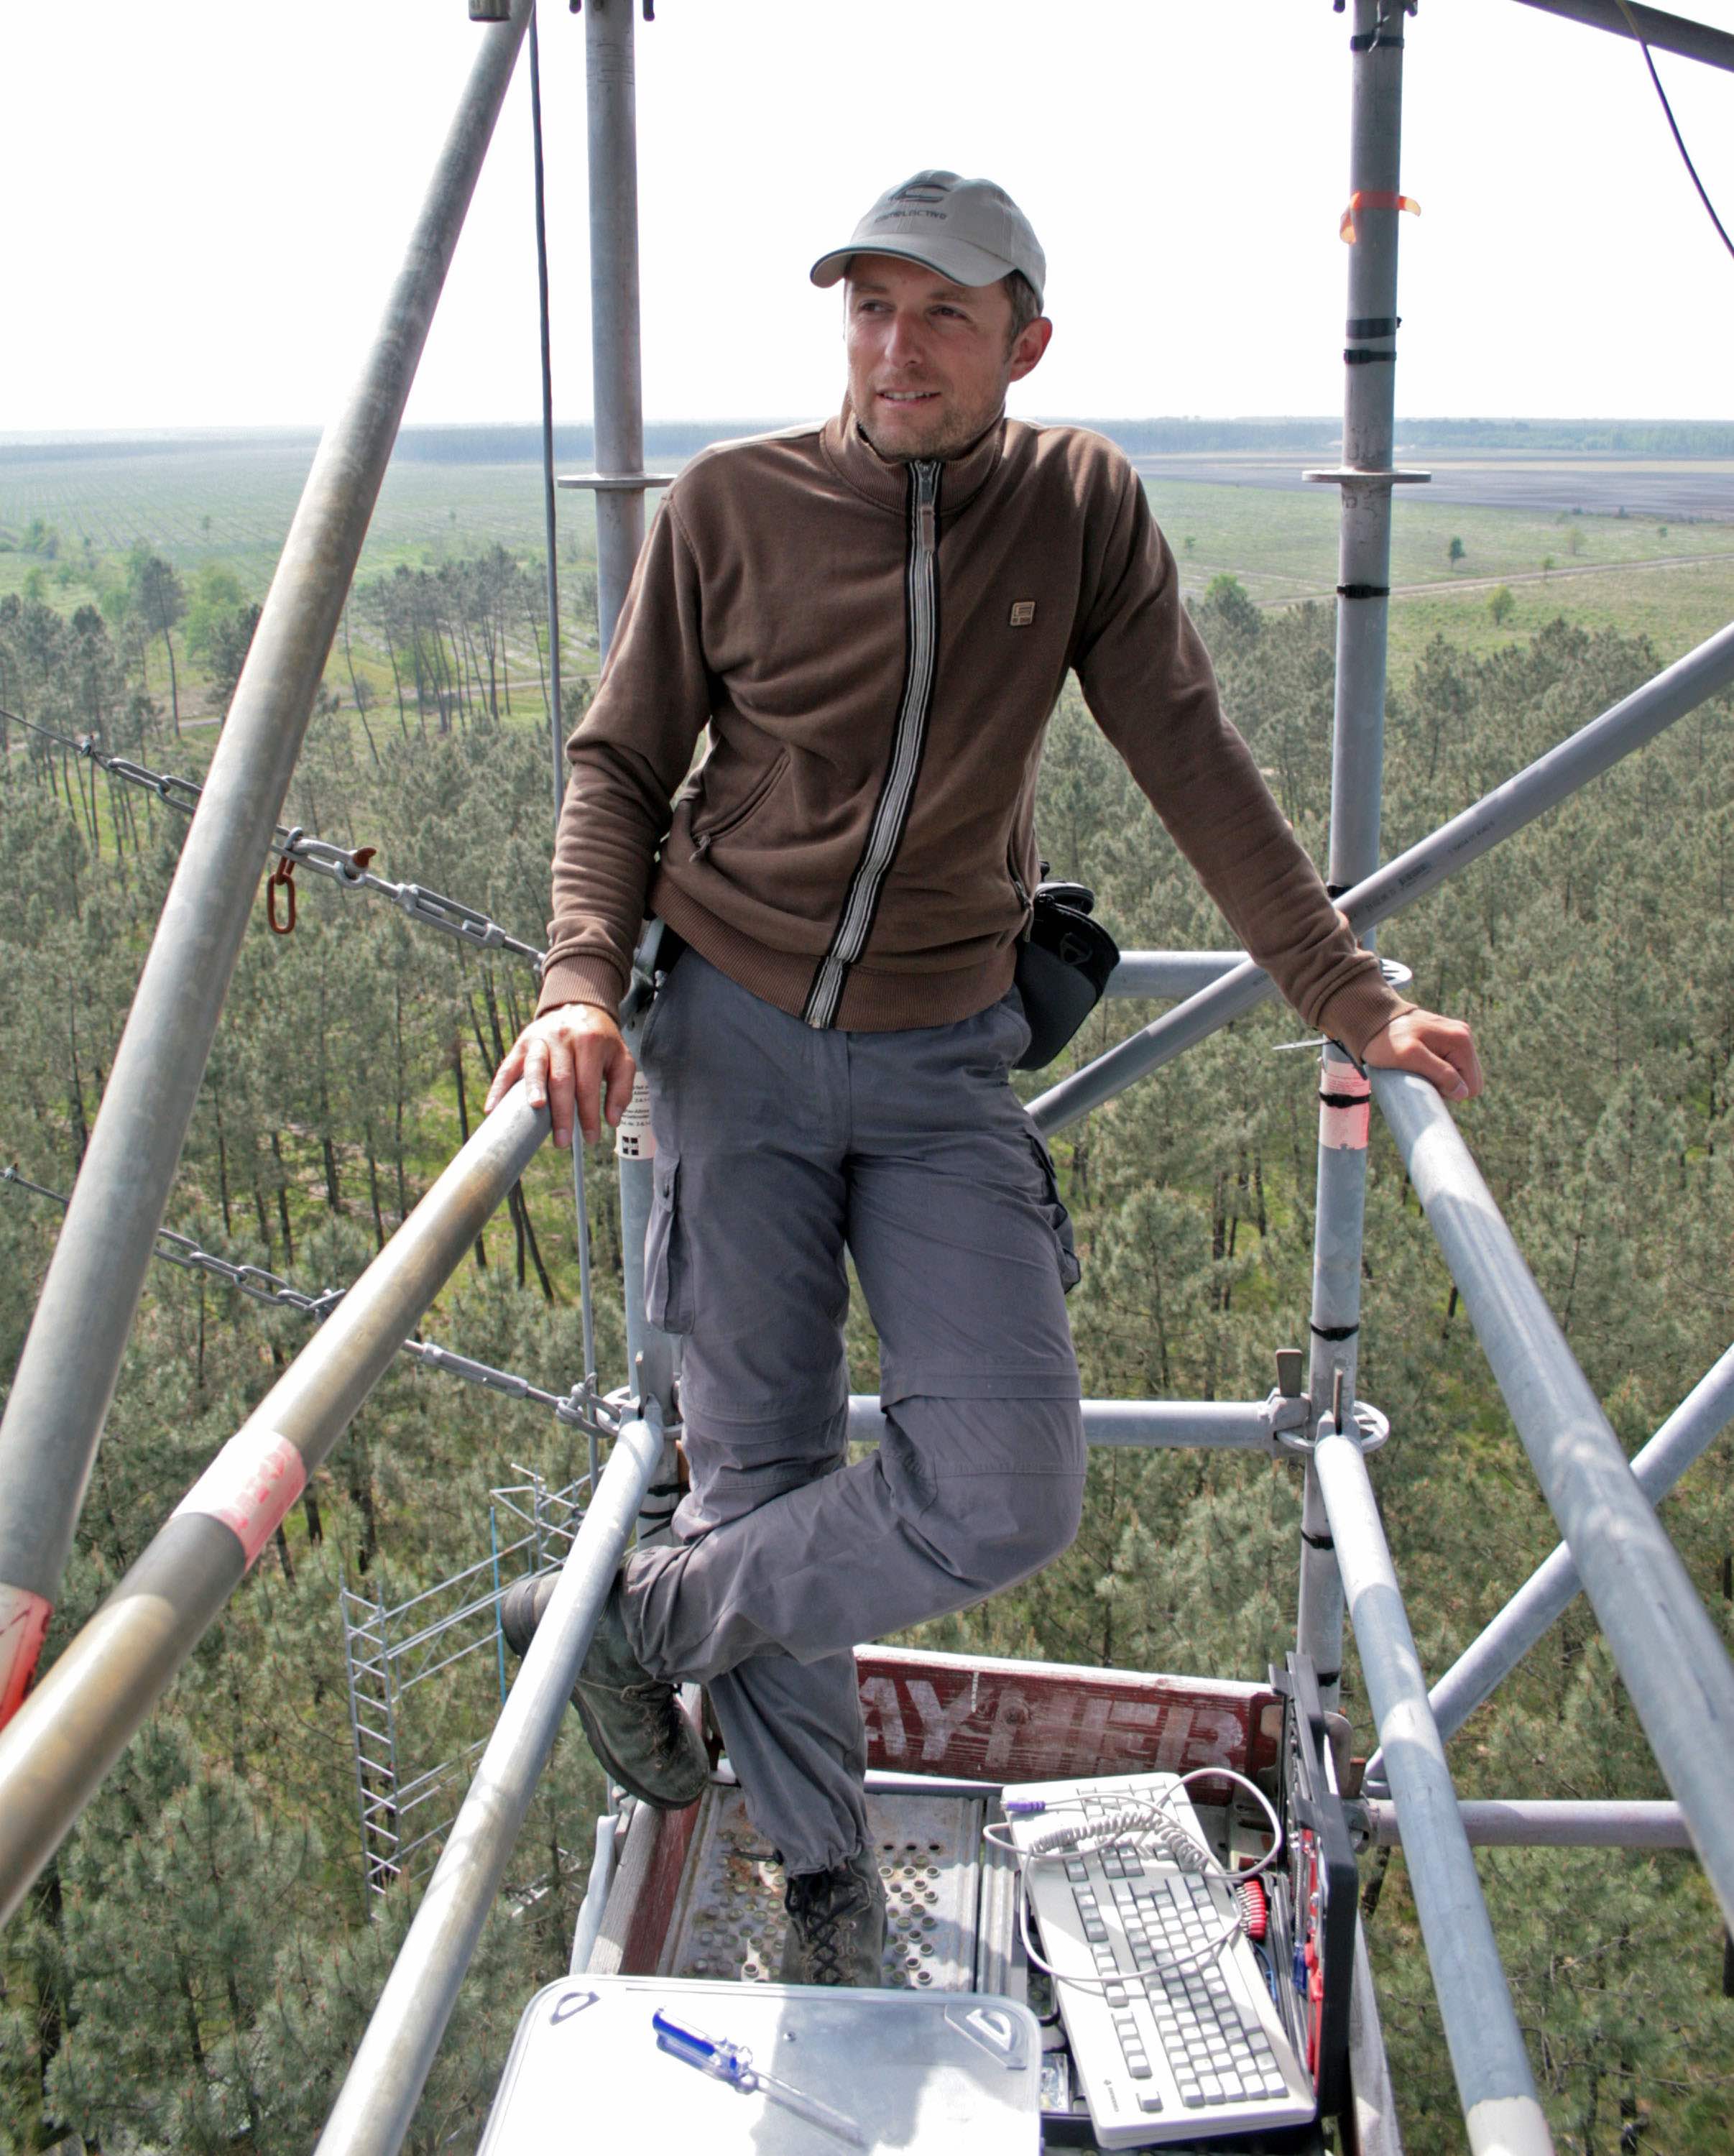 Installation of a field spectrometer at the Le Bray flux tower in France during the CEFLES-2 campaign in 2007. Image credits: Uwe Rascher.